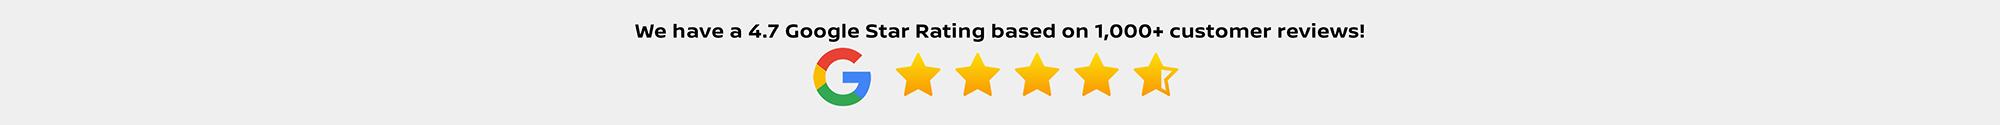 We have a 4.7 Google Star Rating based on 1,000+ customer reviews!